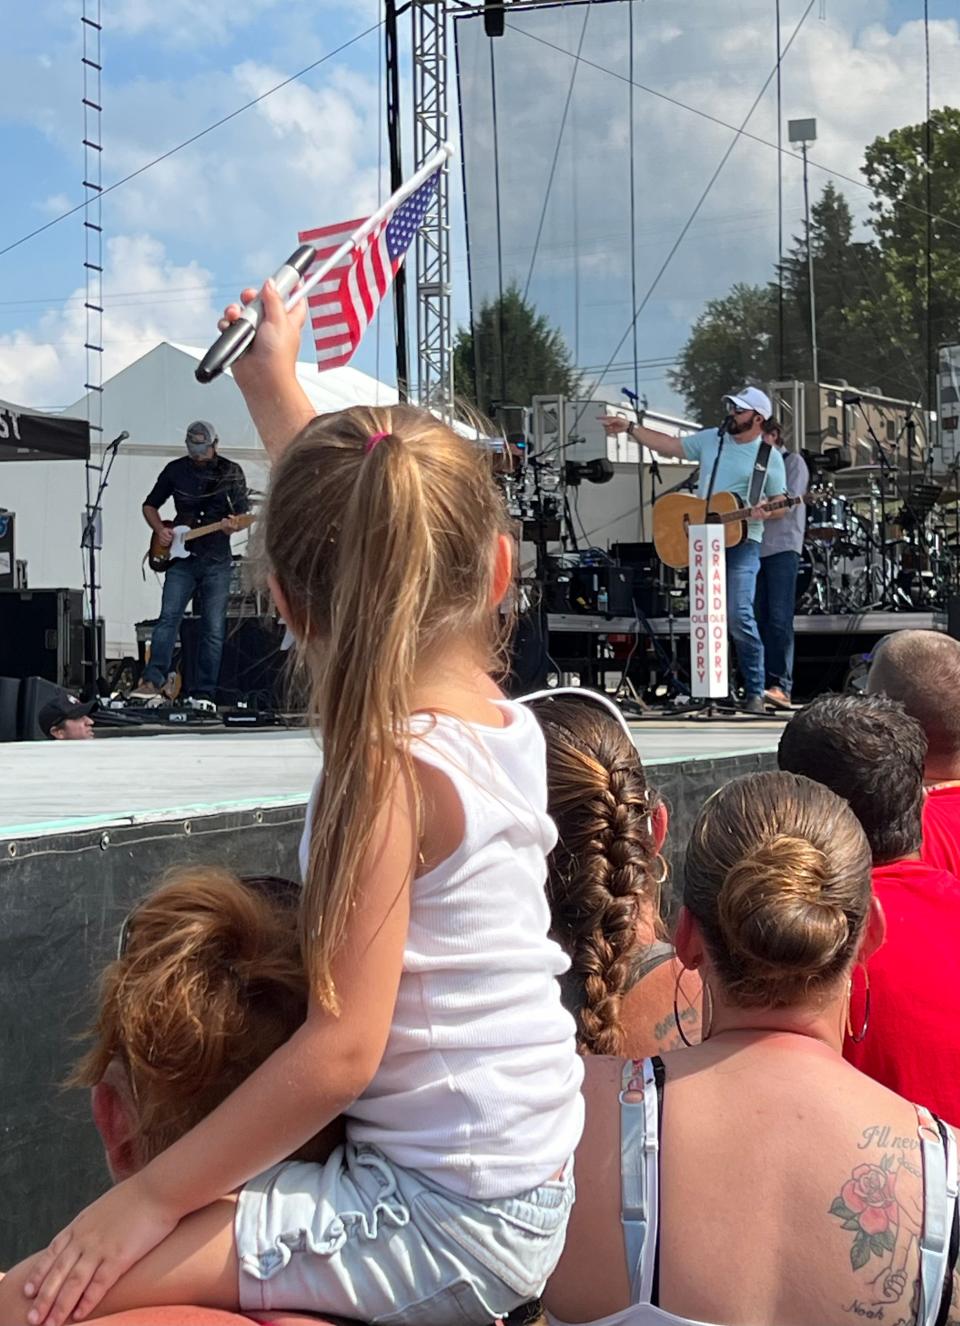 The Neon Nights country music festival started Friday at Clay's Resort Jellystone Park amphitheater. The event continues Saturday with Wynonna Judd, Tim McGraw and other performers.